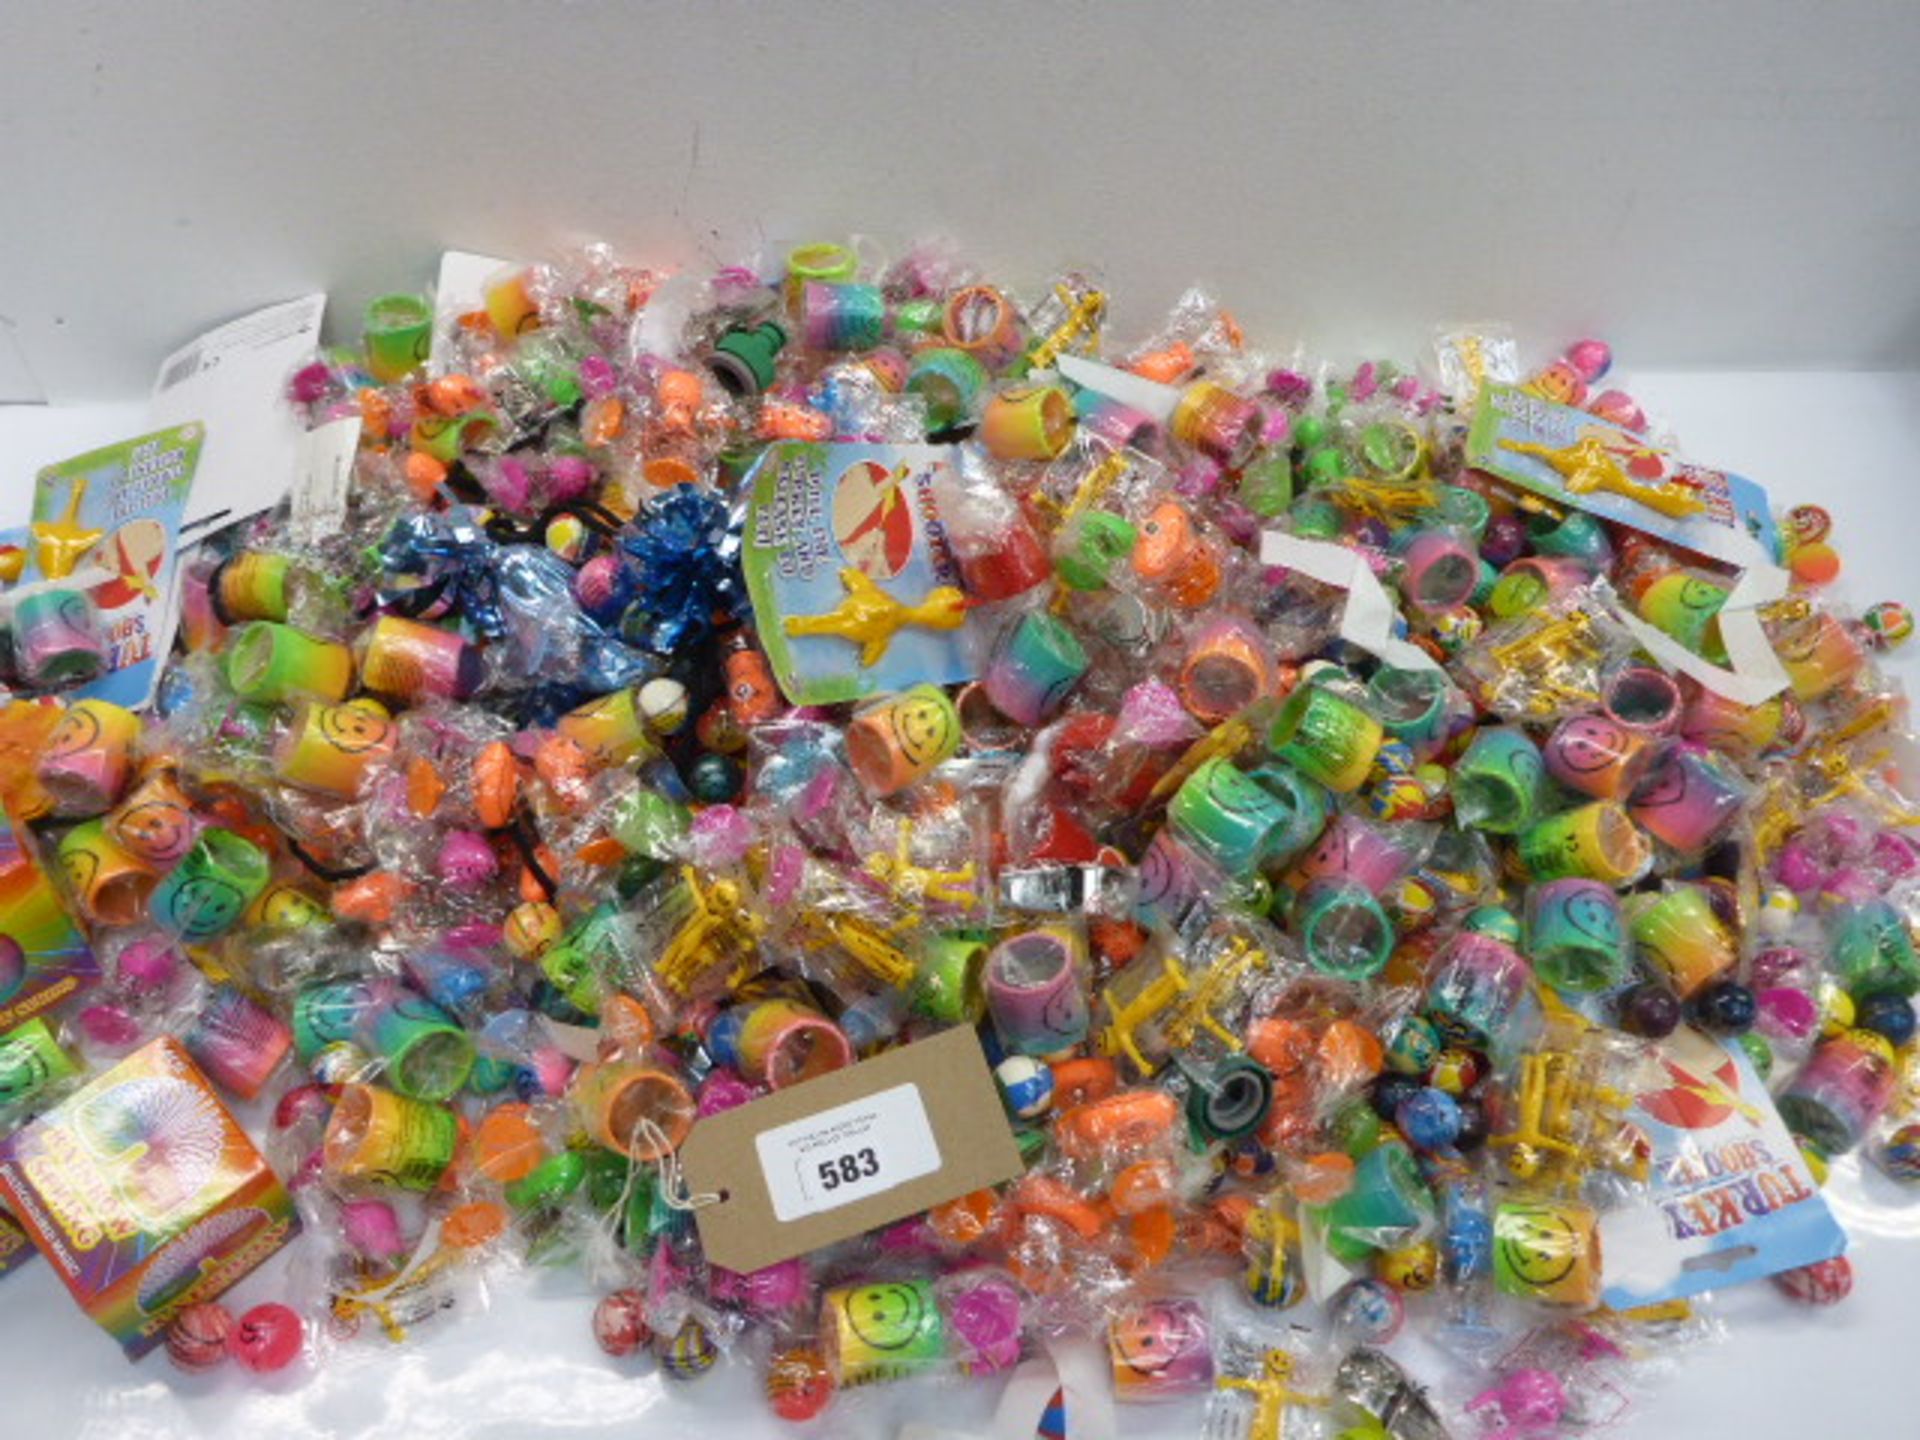 Large bag of novelty toys, bouncy balls, Turkey shooters, whistles, rainbow springs, pop up